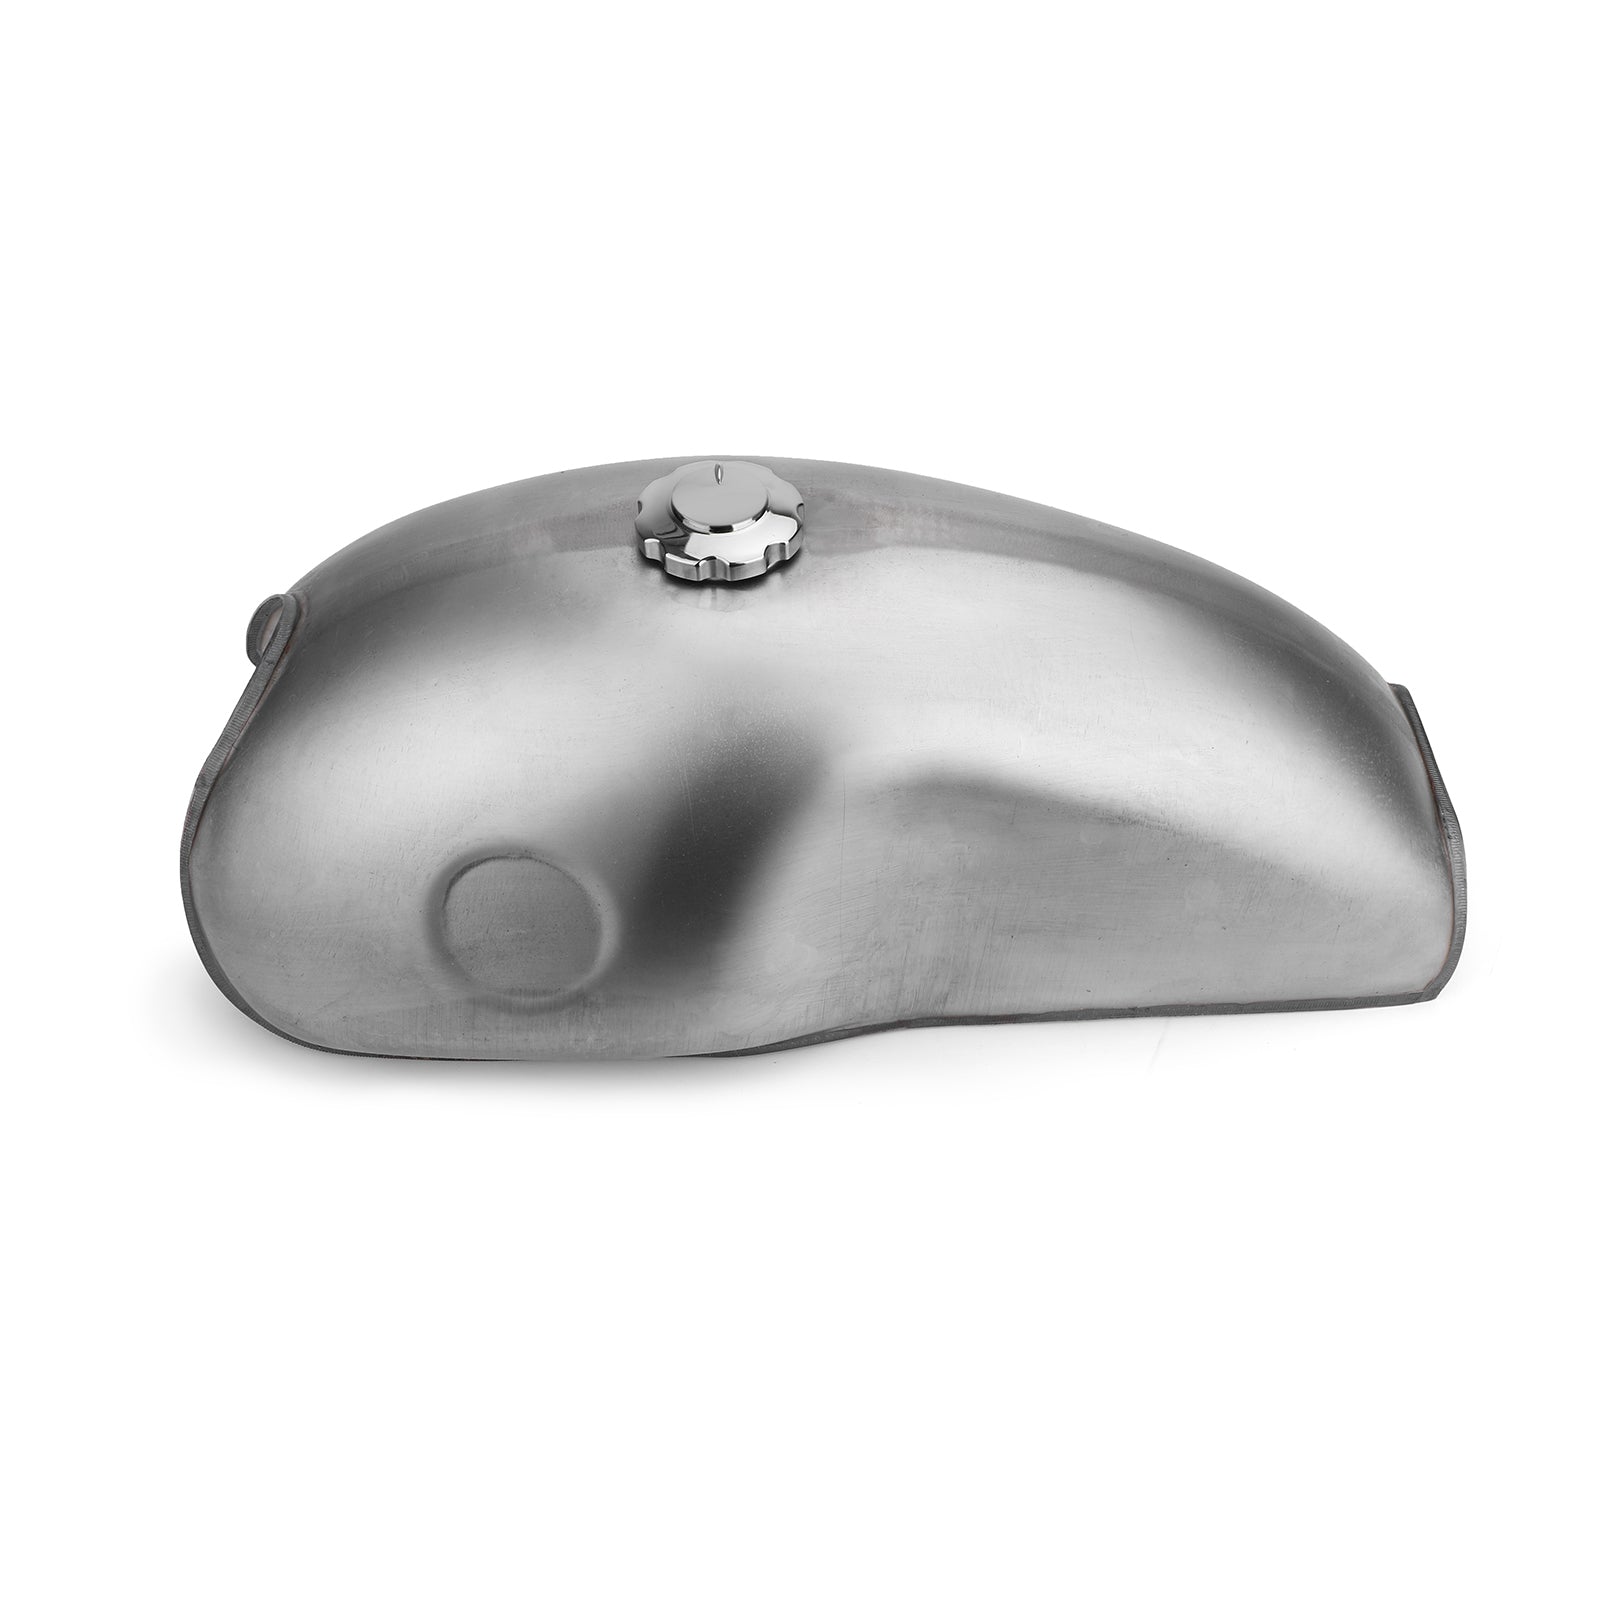 RAW FUEL TANK + CAP + PETCOCK Fit For BENELLI MOJAVE 260 360 CAFE RACER CB XS Generic